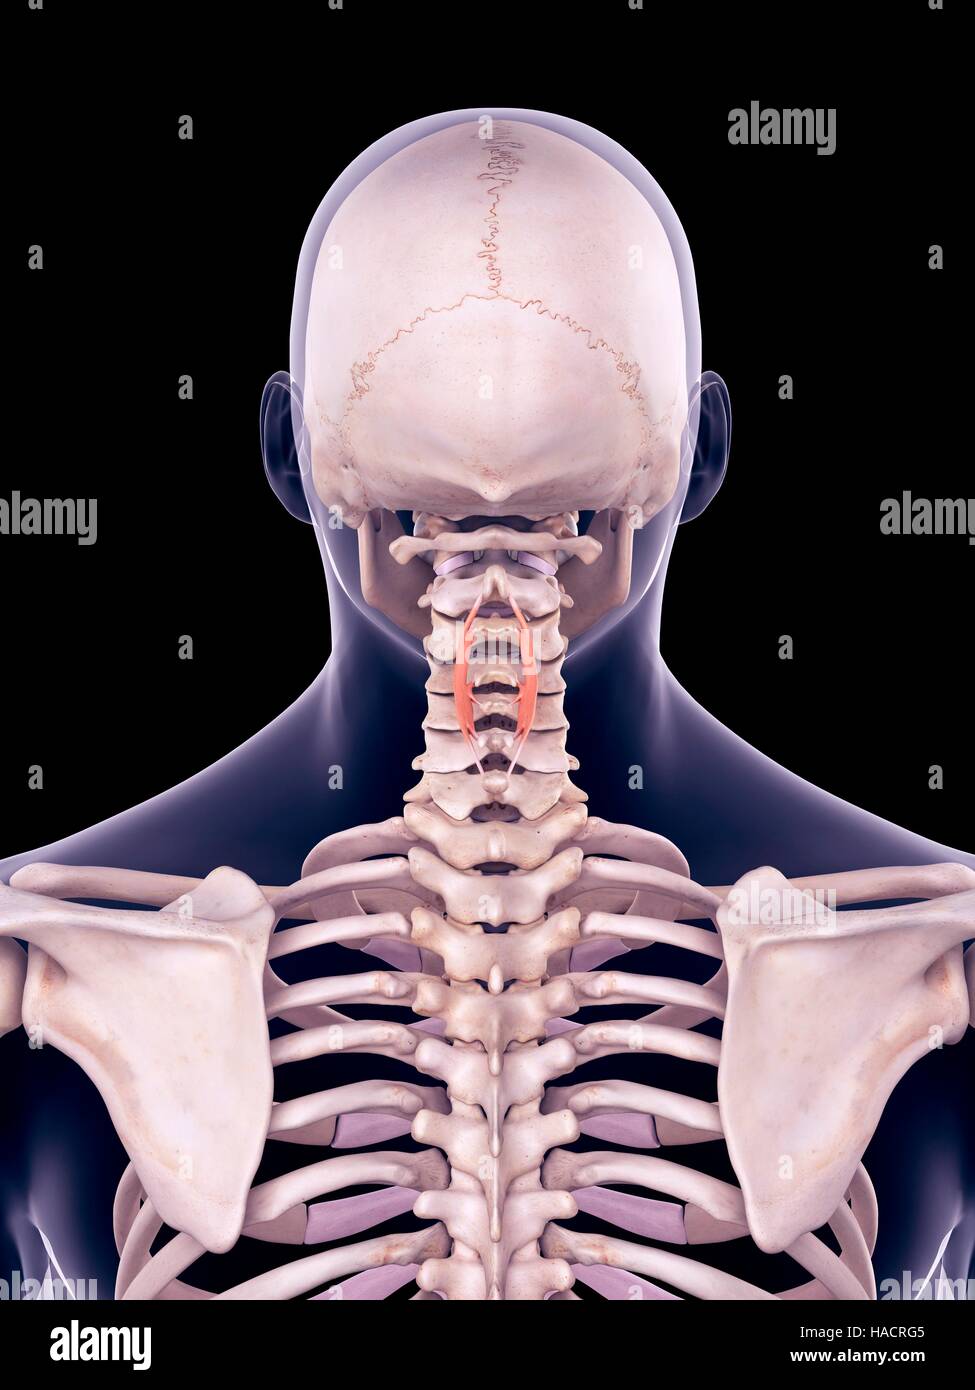 Illustration of the spinalis cervicis muscles. Stock Photo